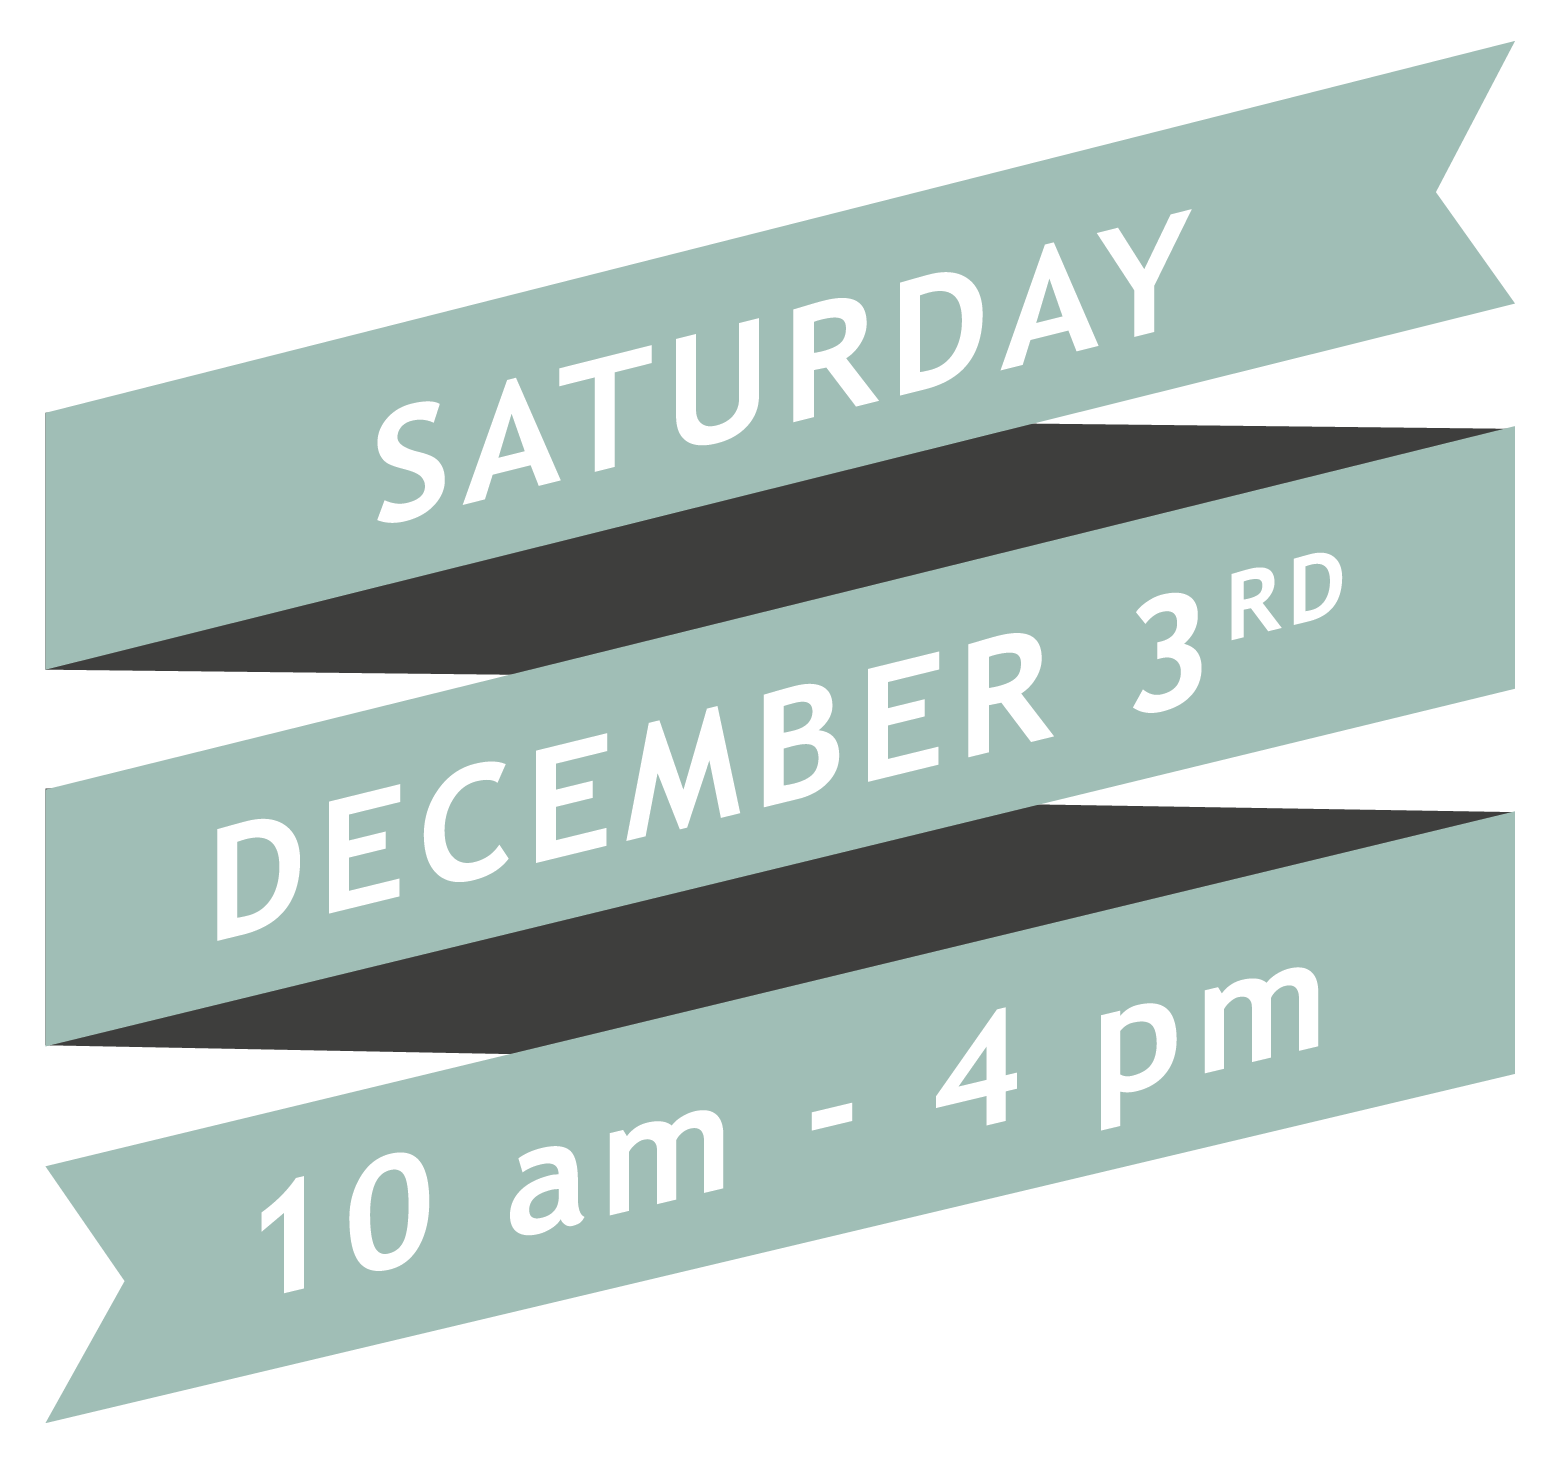 At SCA on Saturday December 3rd (10 AM - 4 PM)